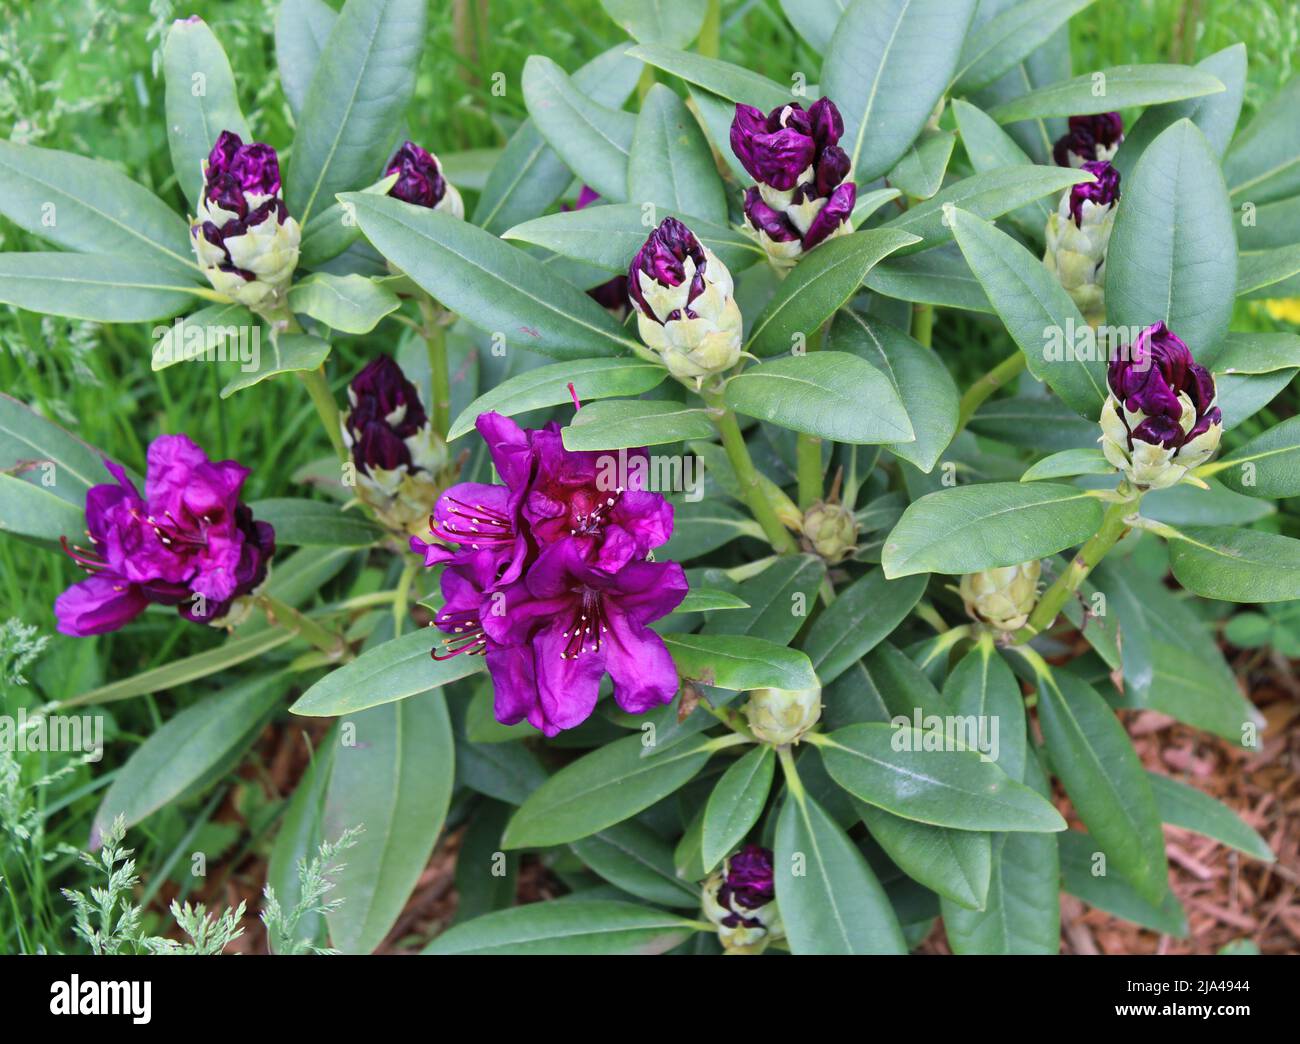 Buds Partially Blooming on Purple Rhododendron Bush Stock Photo